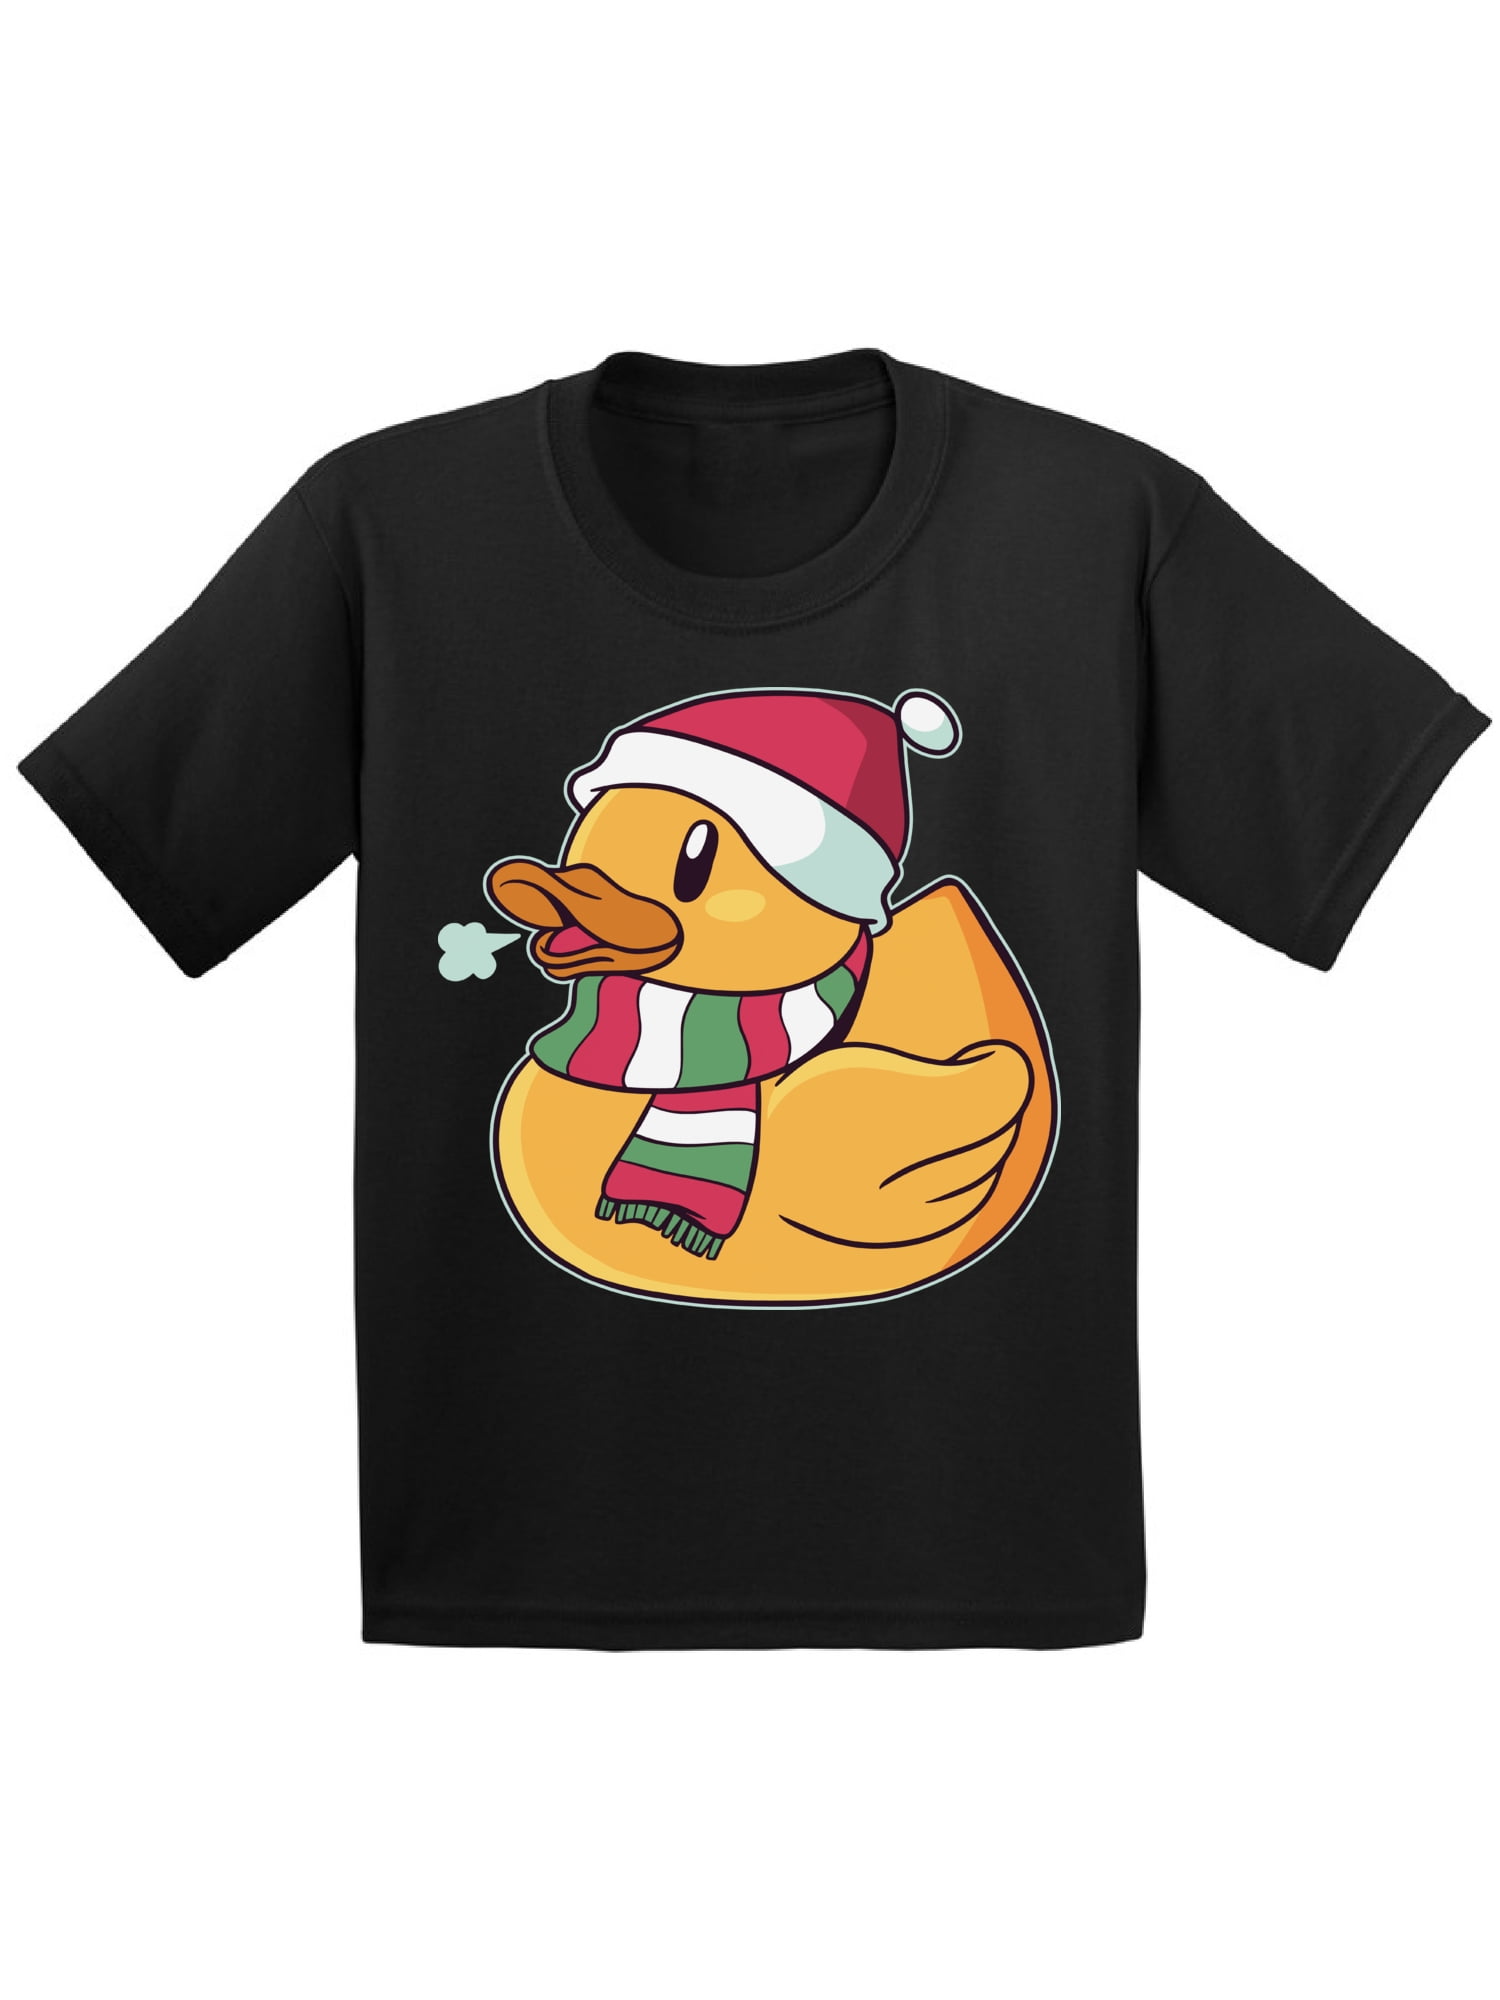 Gender Neutral Funny Rubber Duckie Outfit for Preschooler Birthday Gift for Child Fresh out of Ducks Toddler Short Sleeve Tee Shirt